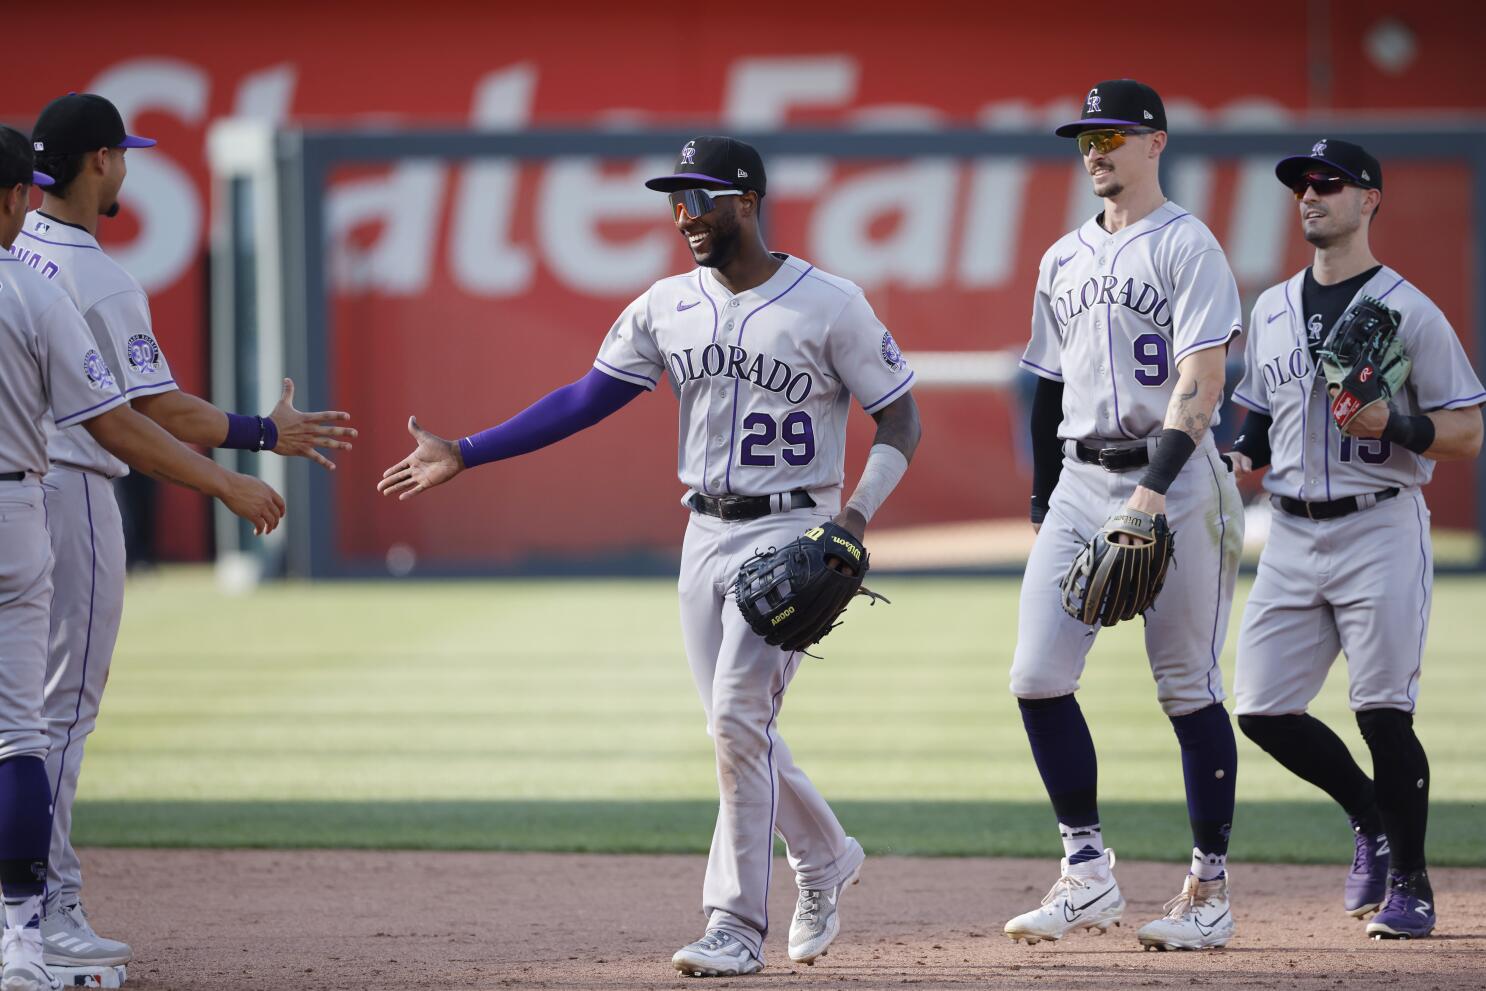 Royals fall to Rockies 4-6 after 5-run first inning